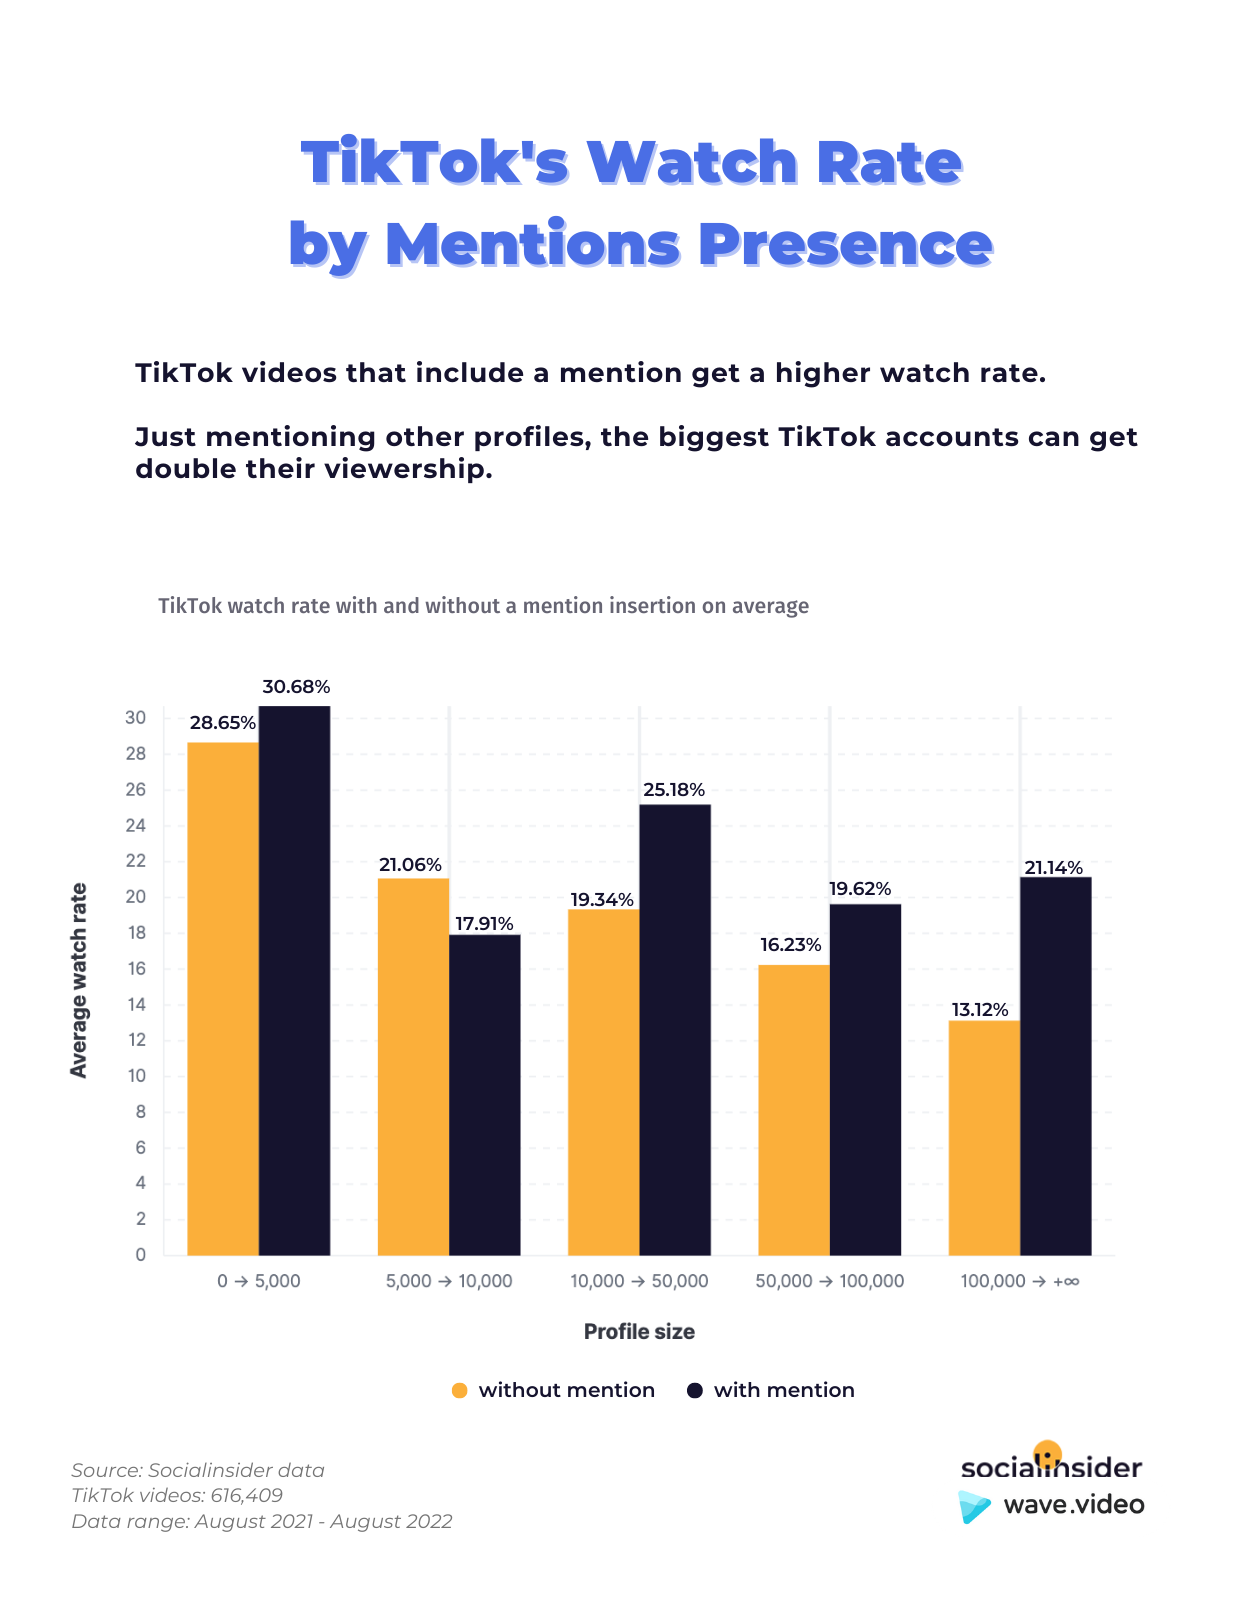 A chart about tiktok's watch rate by mentions presence